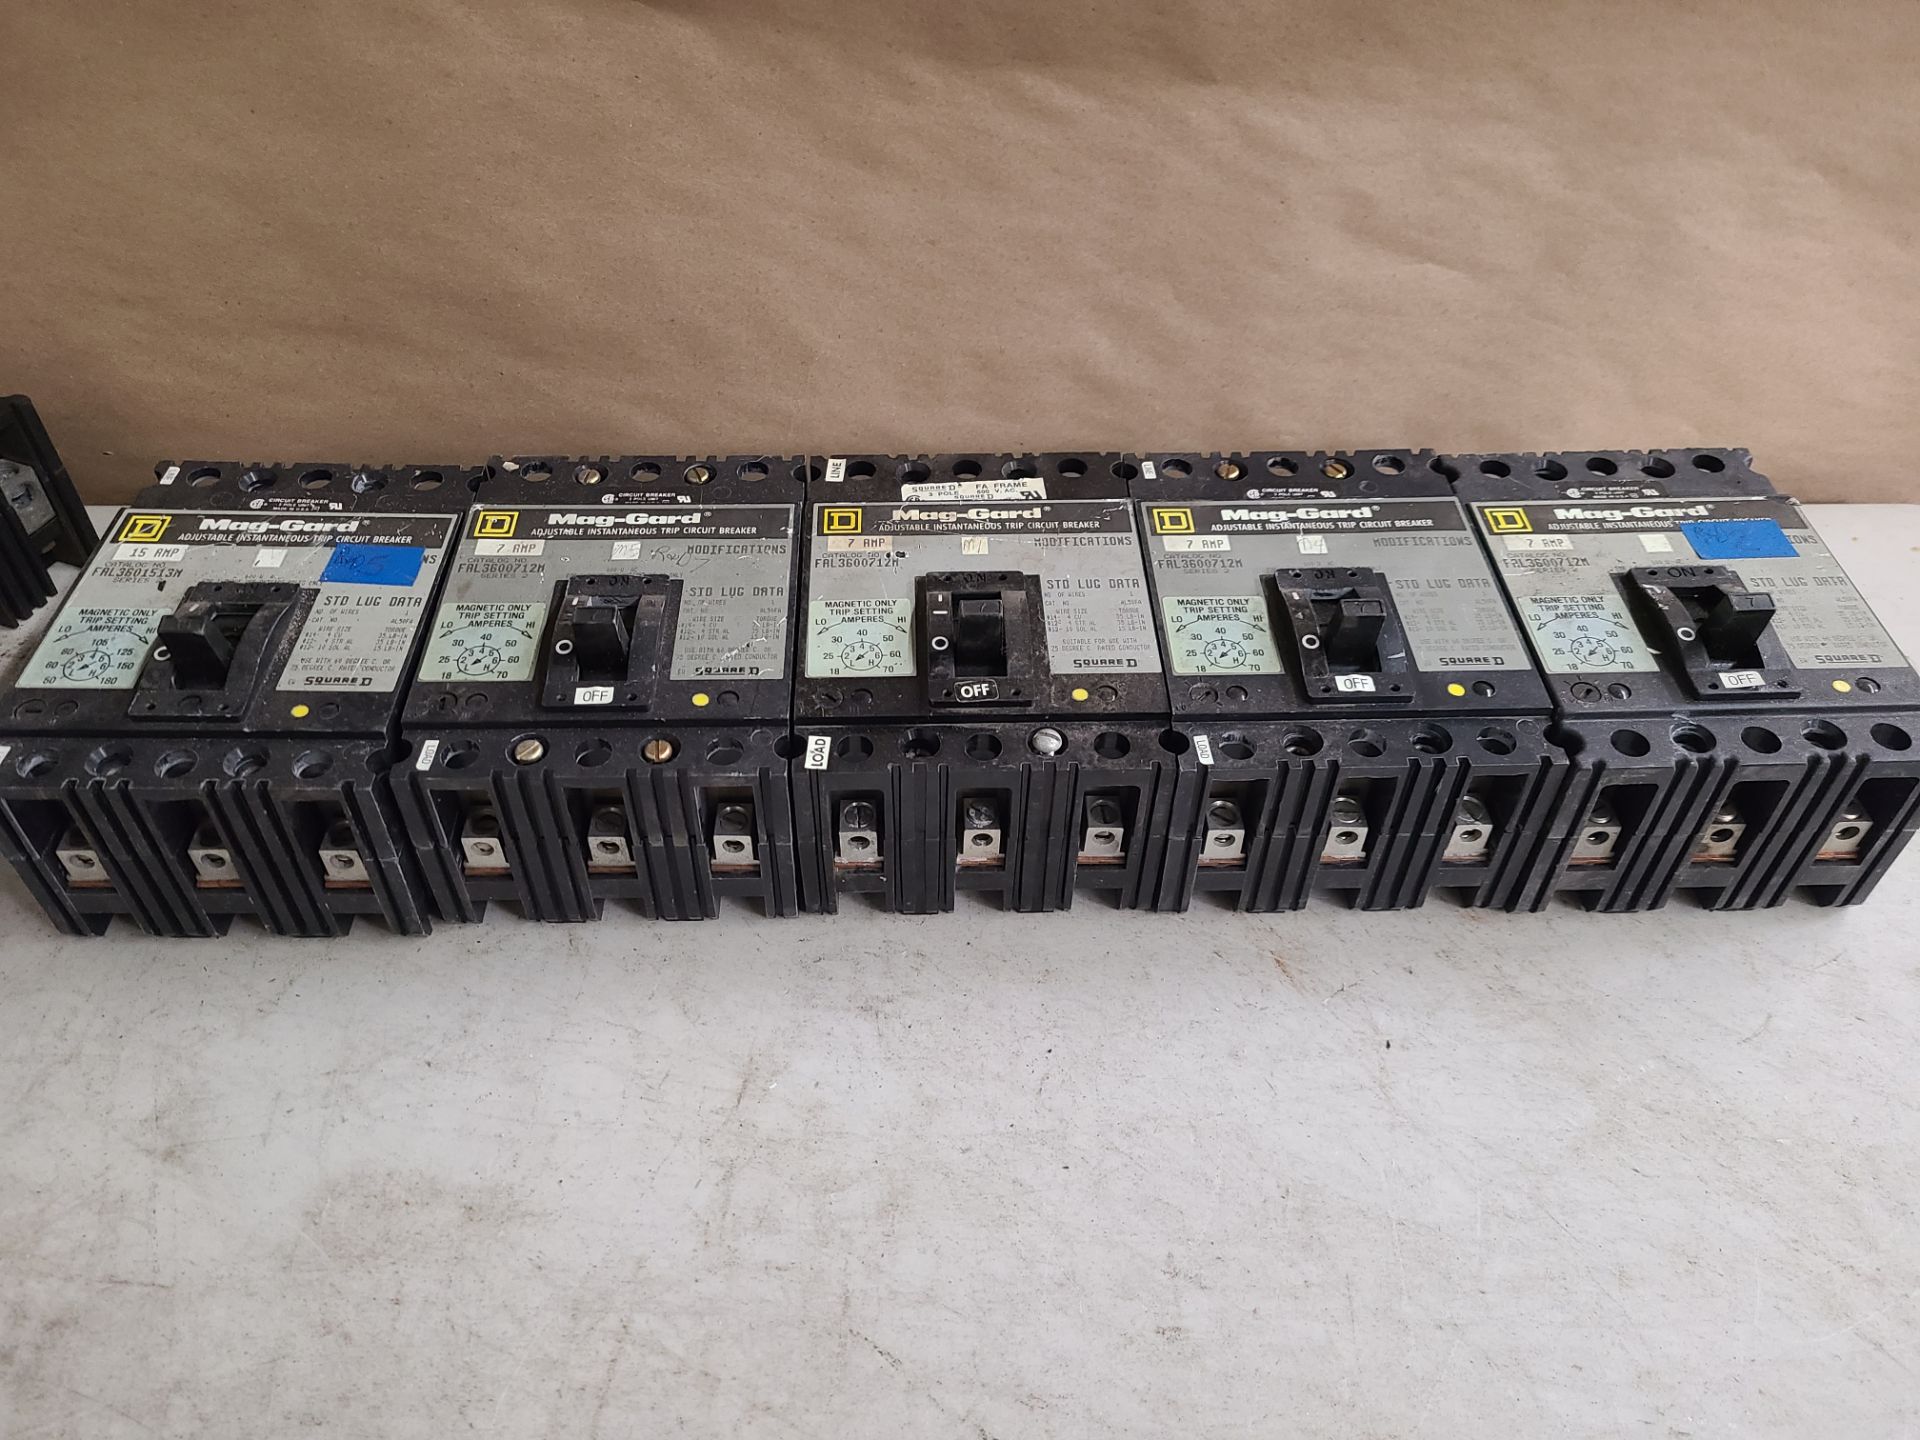 LOT OF SQUARE D MAG-GARD INDUSTRIAL MOLDED CASE CIRCUIT BREAKERS - Image 9 of 11